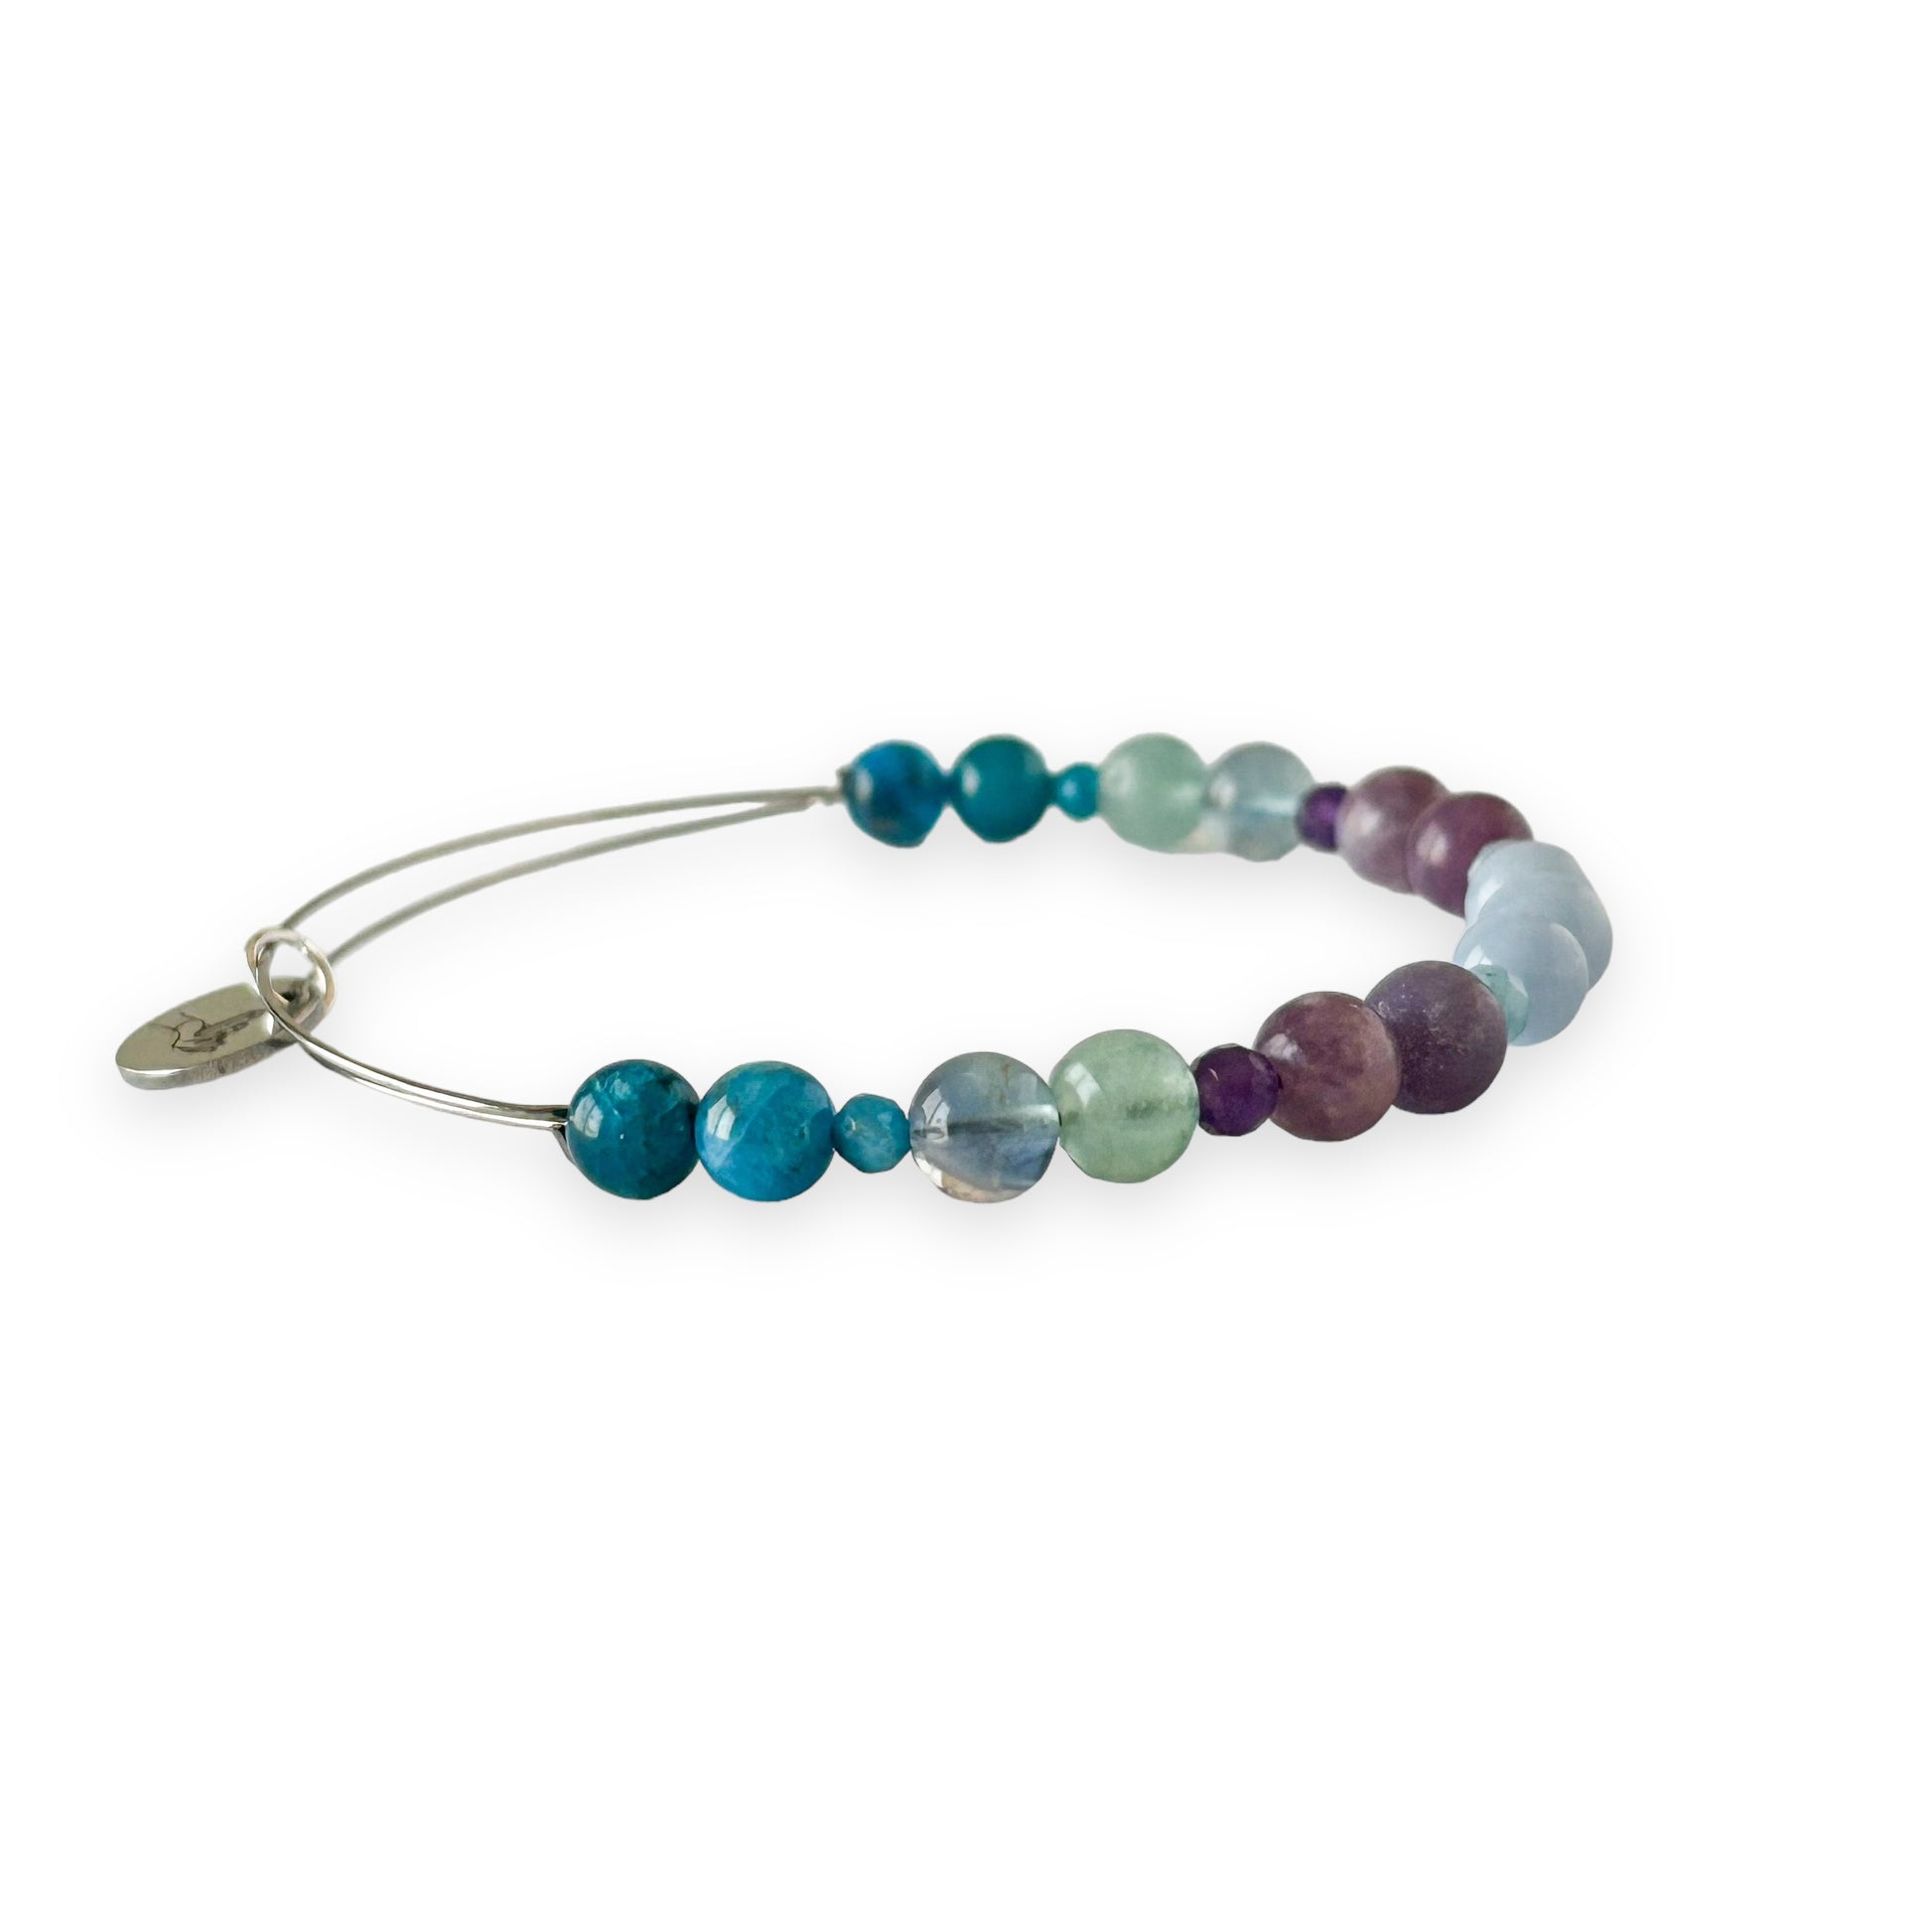 Apatite and Angelite tranquility bangle